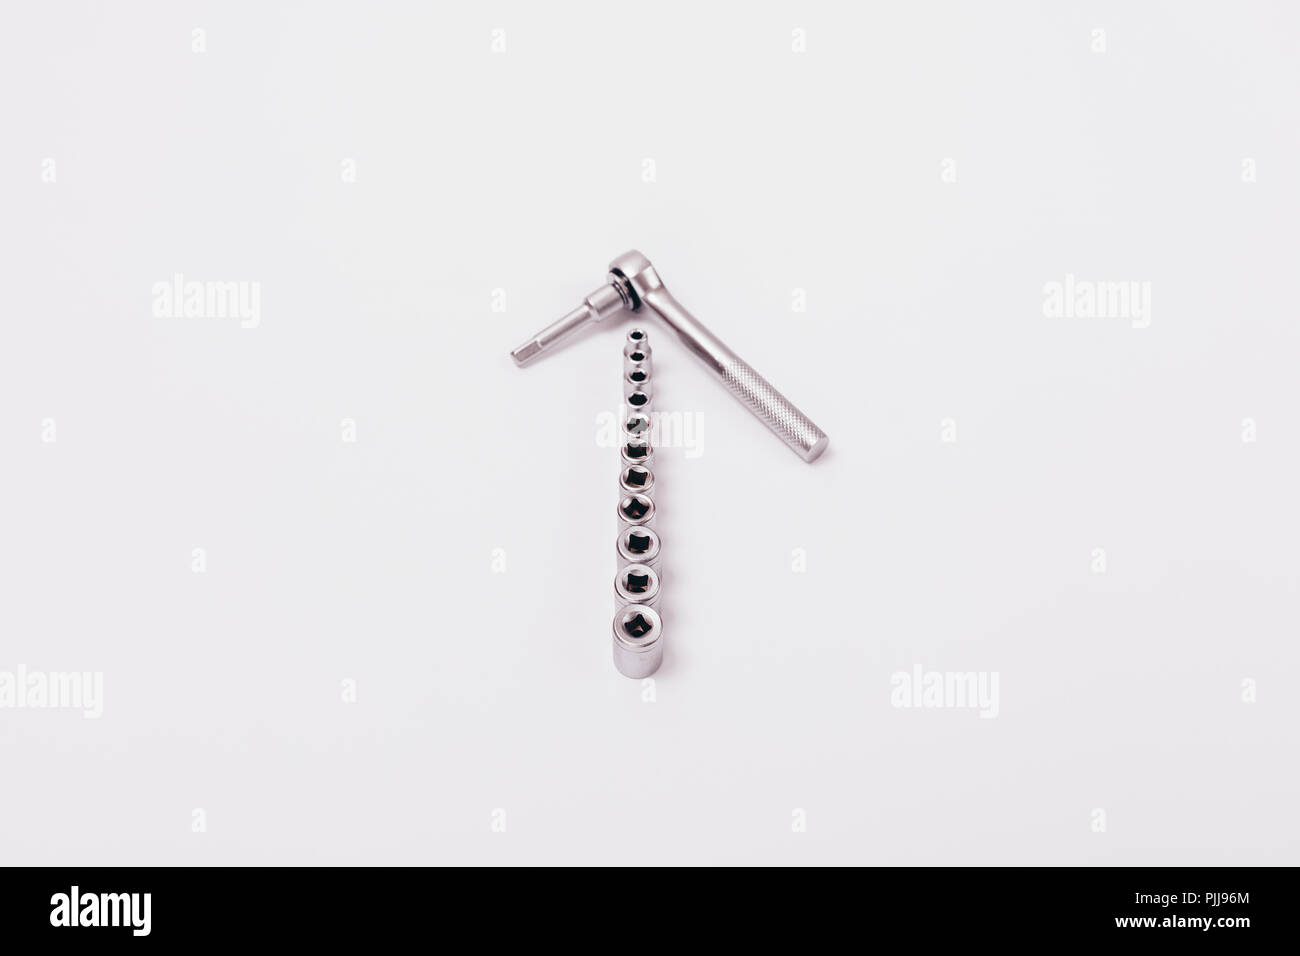 Spanner and various attachments. Composition of metal hand tools on a white background. Stock Photo